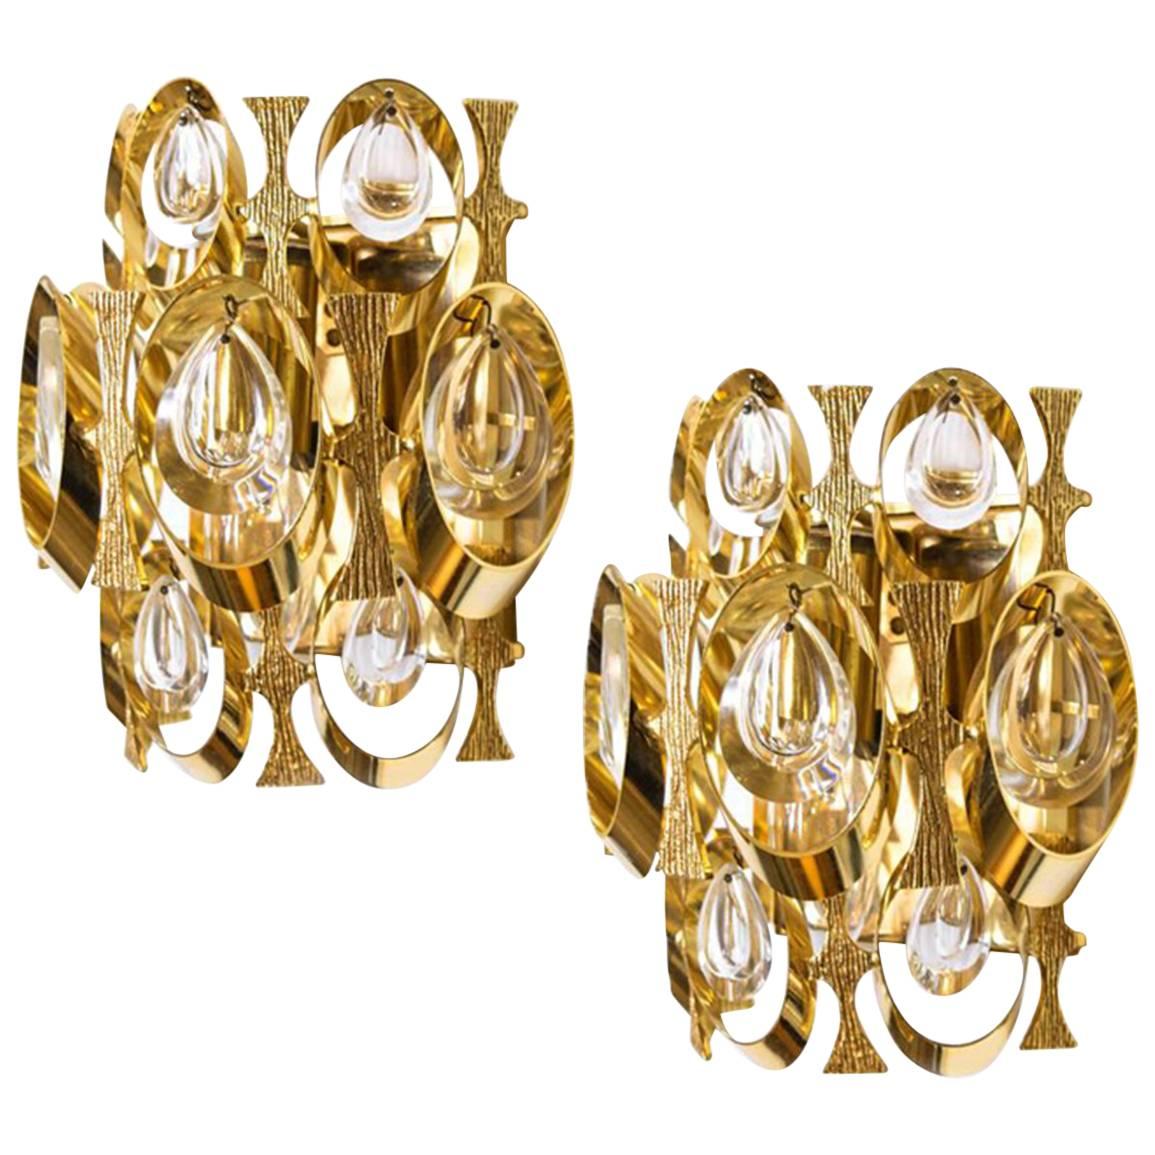 Pair of Crystal and Gold-Plated Sciolari Wall Sconces, Italy, 1960